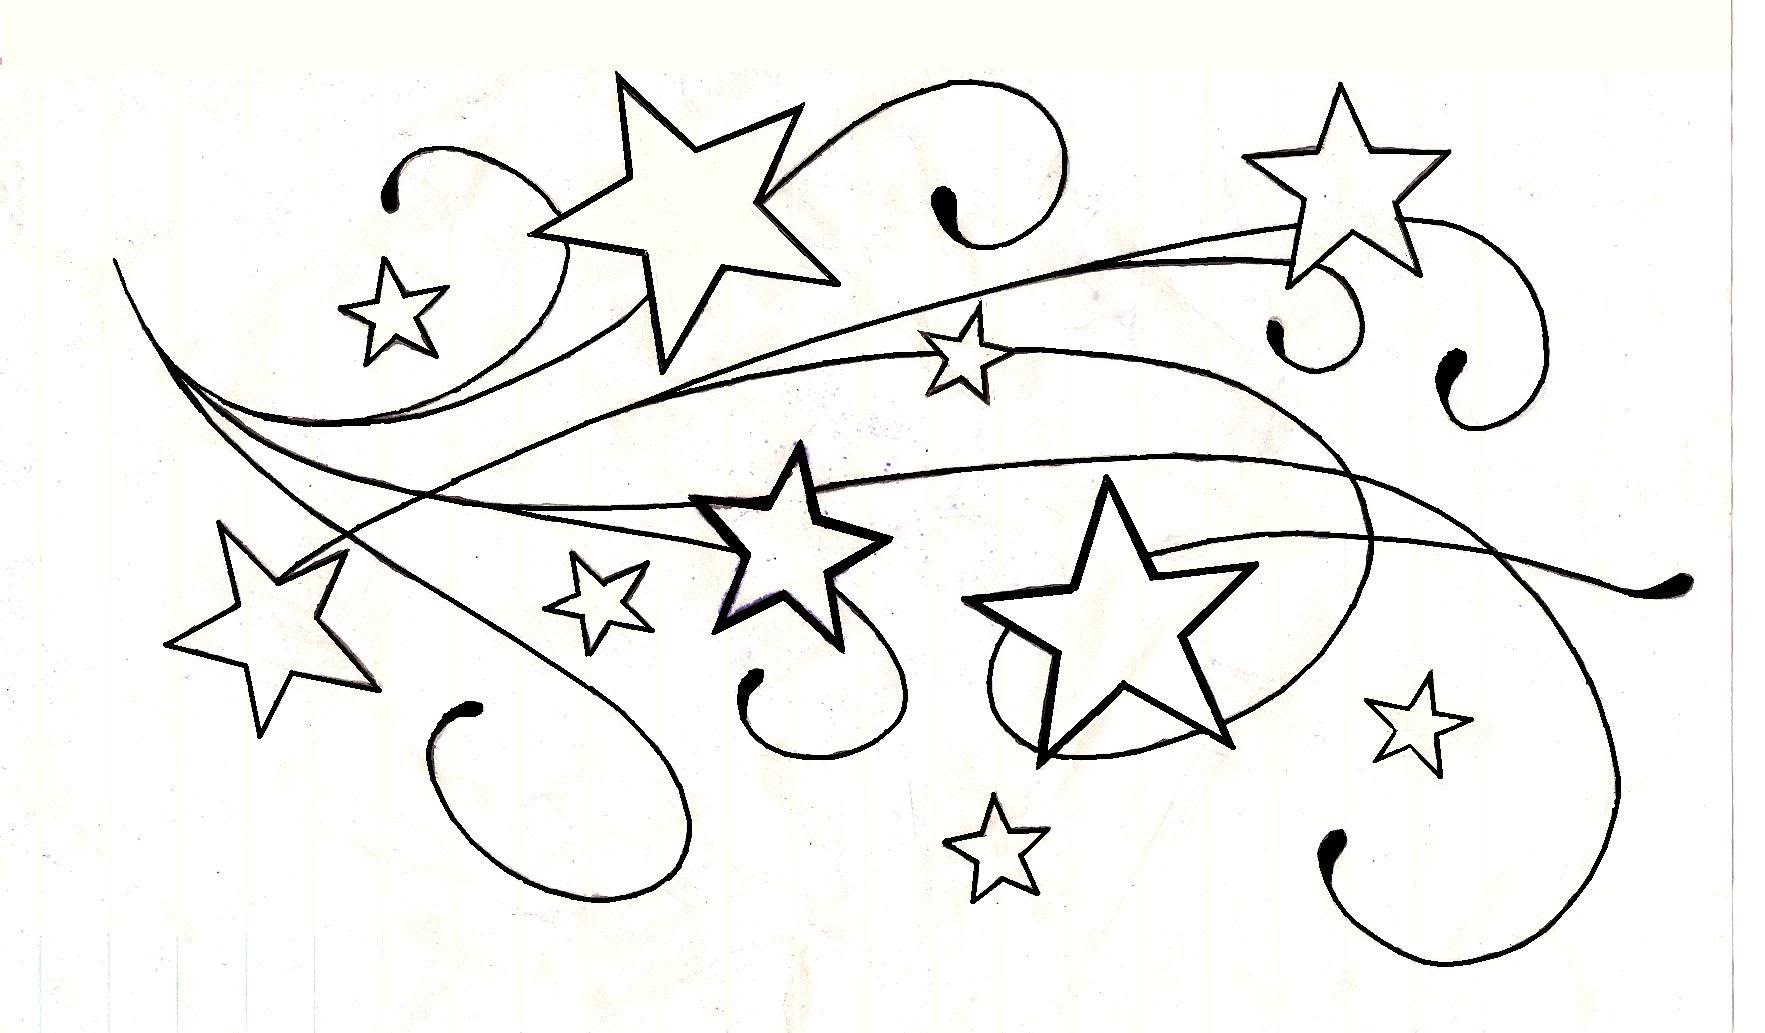 star design to draw - Clip Art Library